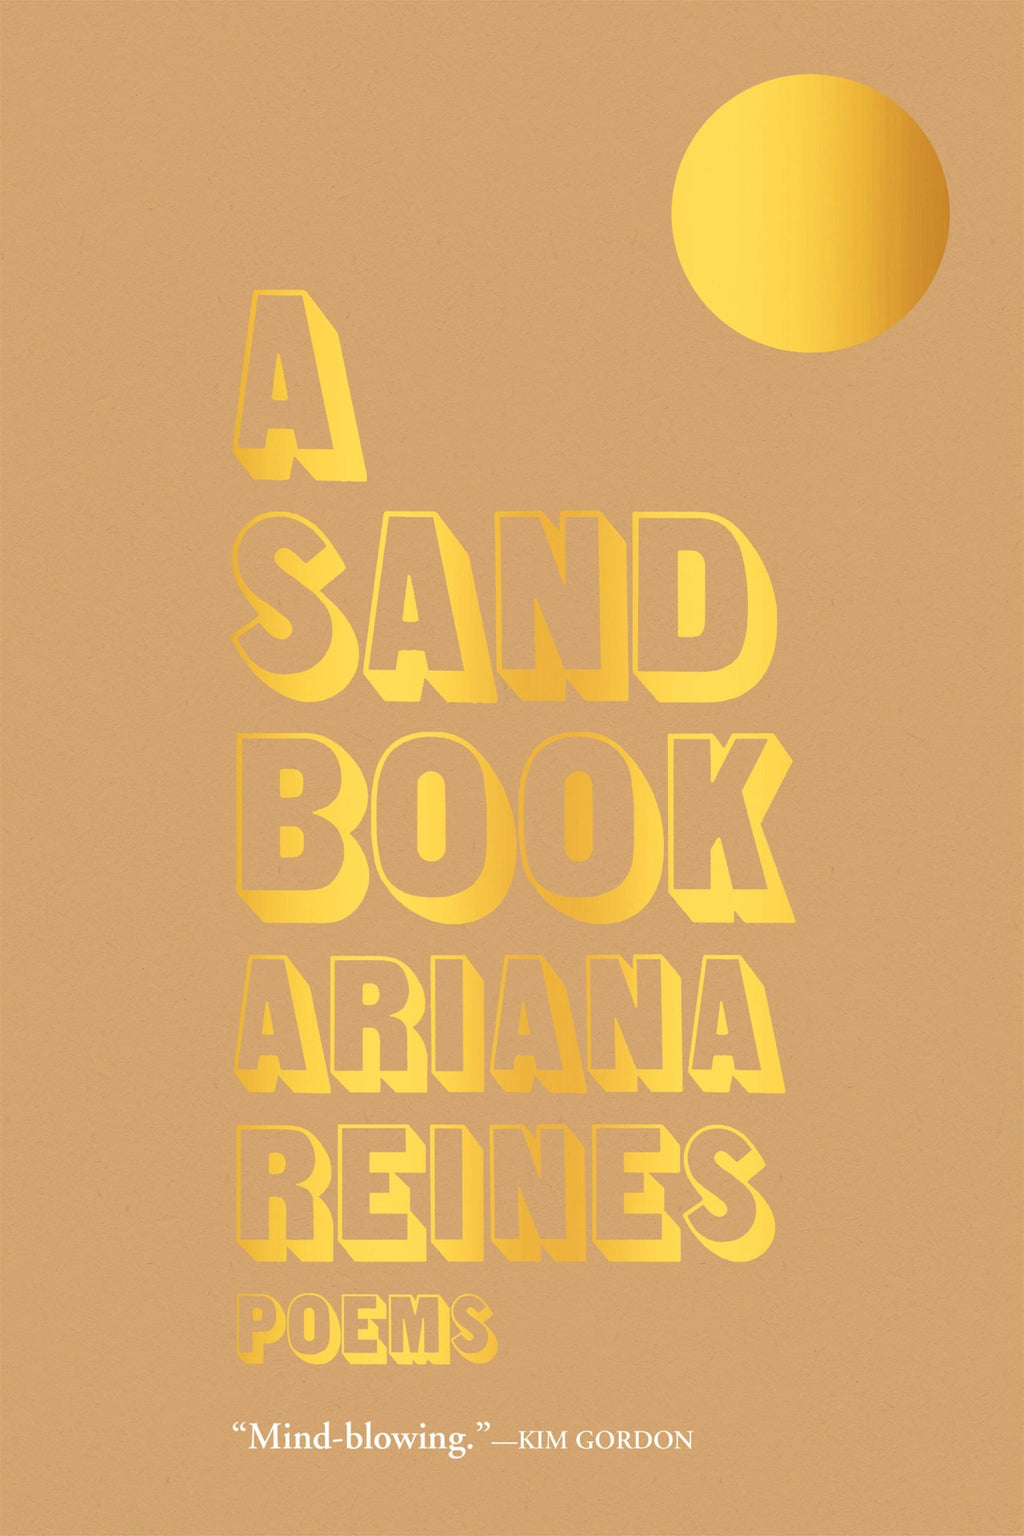 A Sand Book by Ariana Reines